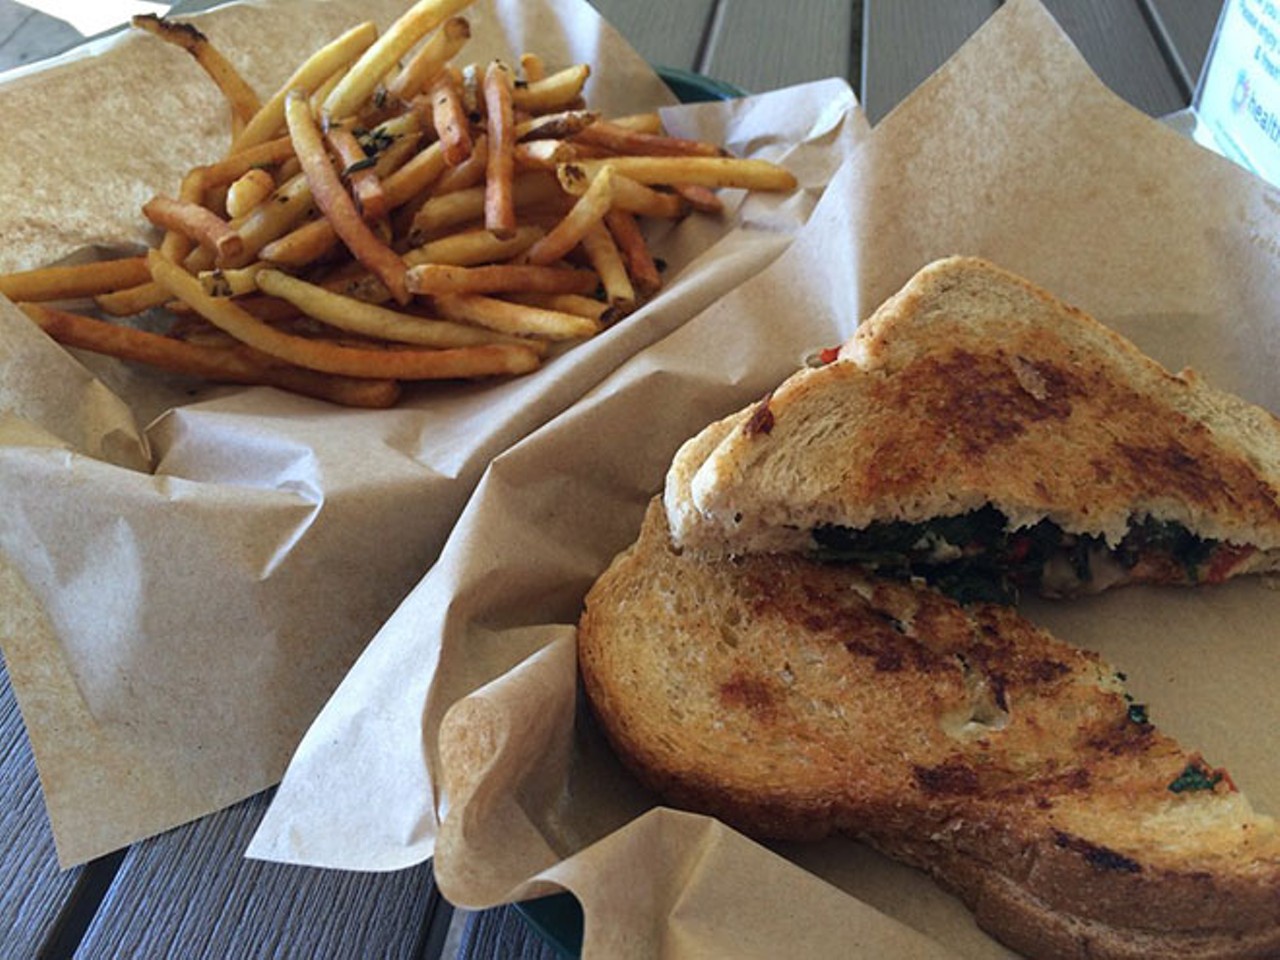 Vegan Fireball grilled cheese and rosemary fries at Toasted
1945 Aloma Ave., Winter Park, 407-960-3922, igettoasted.com
Another place that pleases both meat- and dairy-eaters and those who avoid animal products, Toasted offers house-made vegan cheese in several sandwiches. Hotheads should go for the Vegan Fireball, with jalape&ntilde;o, sriracha and tomato.
Photo via Yelp user Davina M.